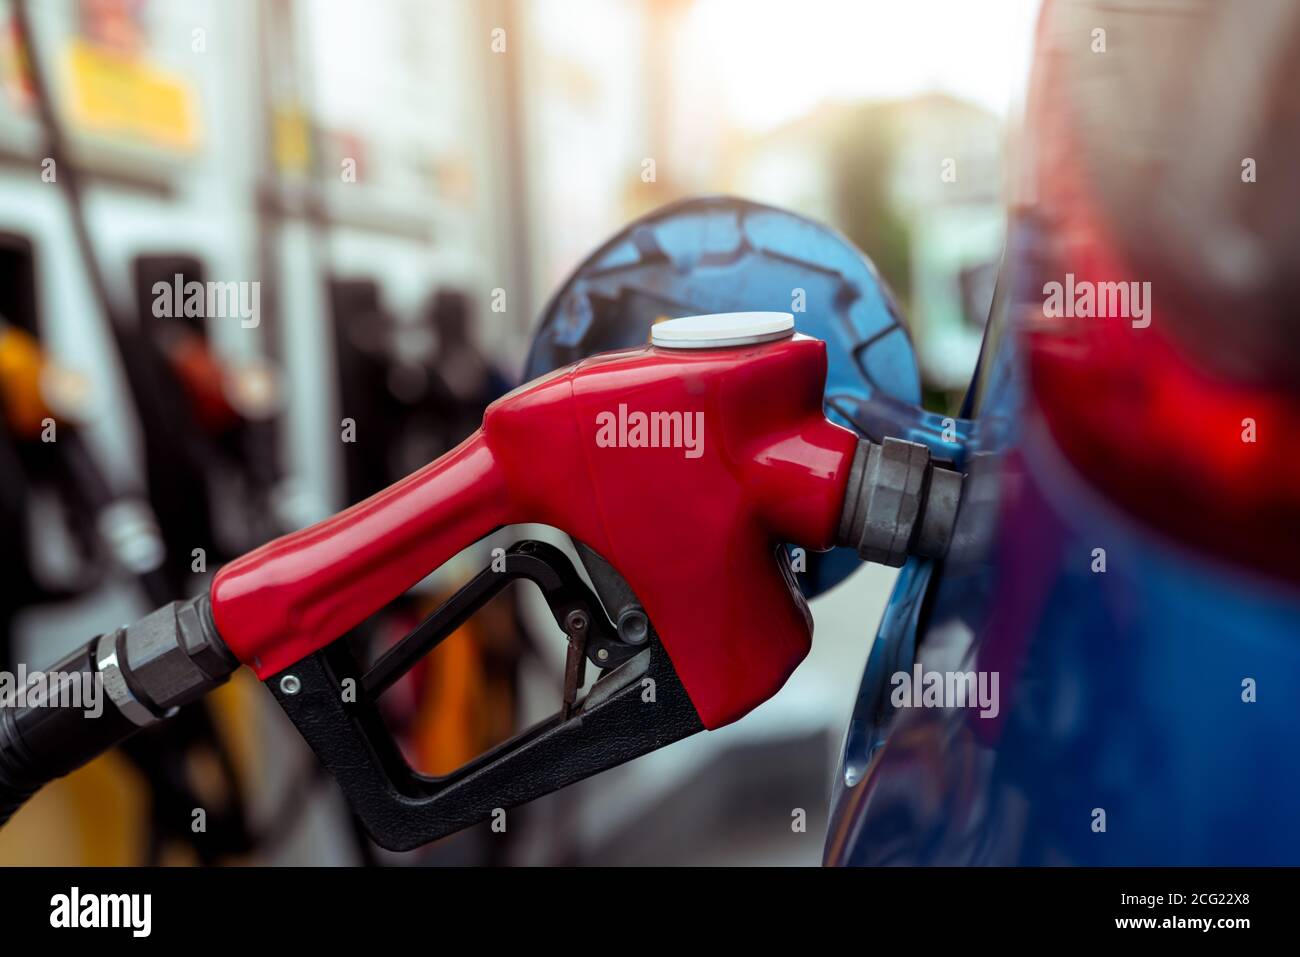 Car fueling at gas station. Refuel fill up with petrol gasoline. Petrol pump filling fuel nozzle in fuel tank of car at gas station. Petrol industry. Stock Photo